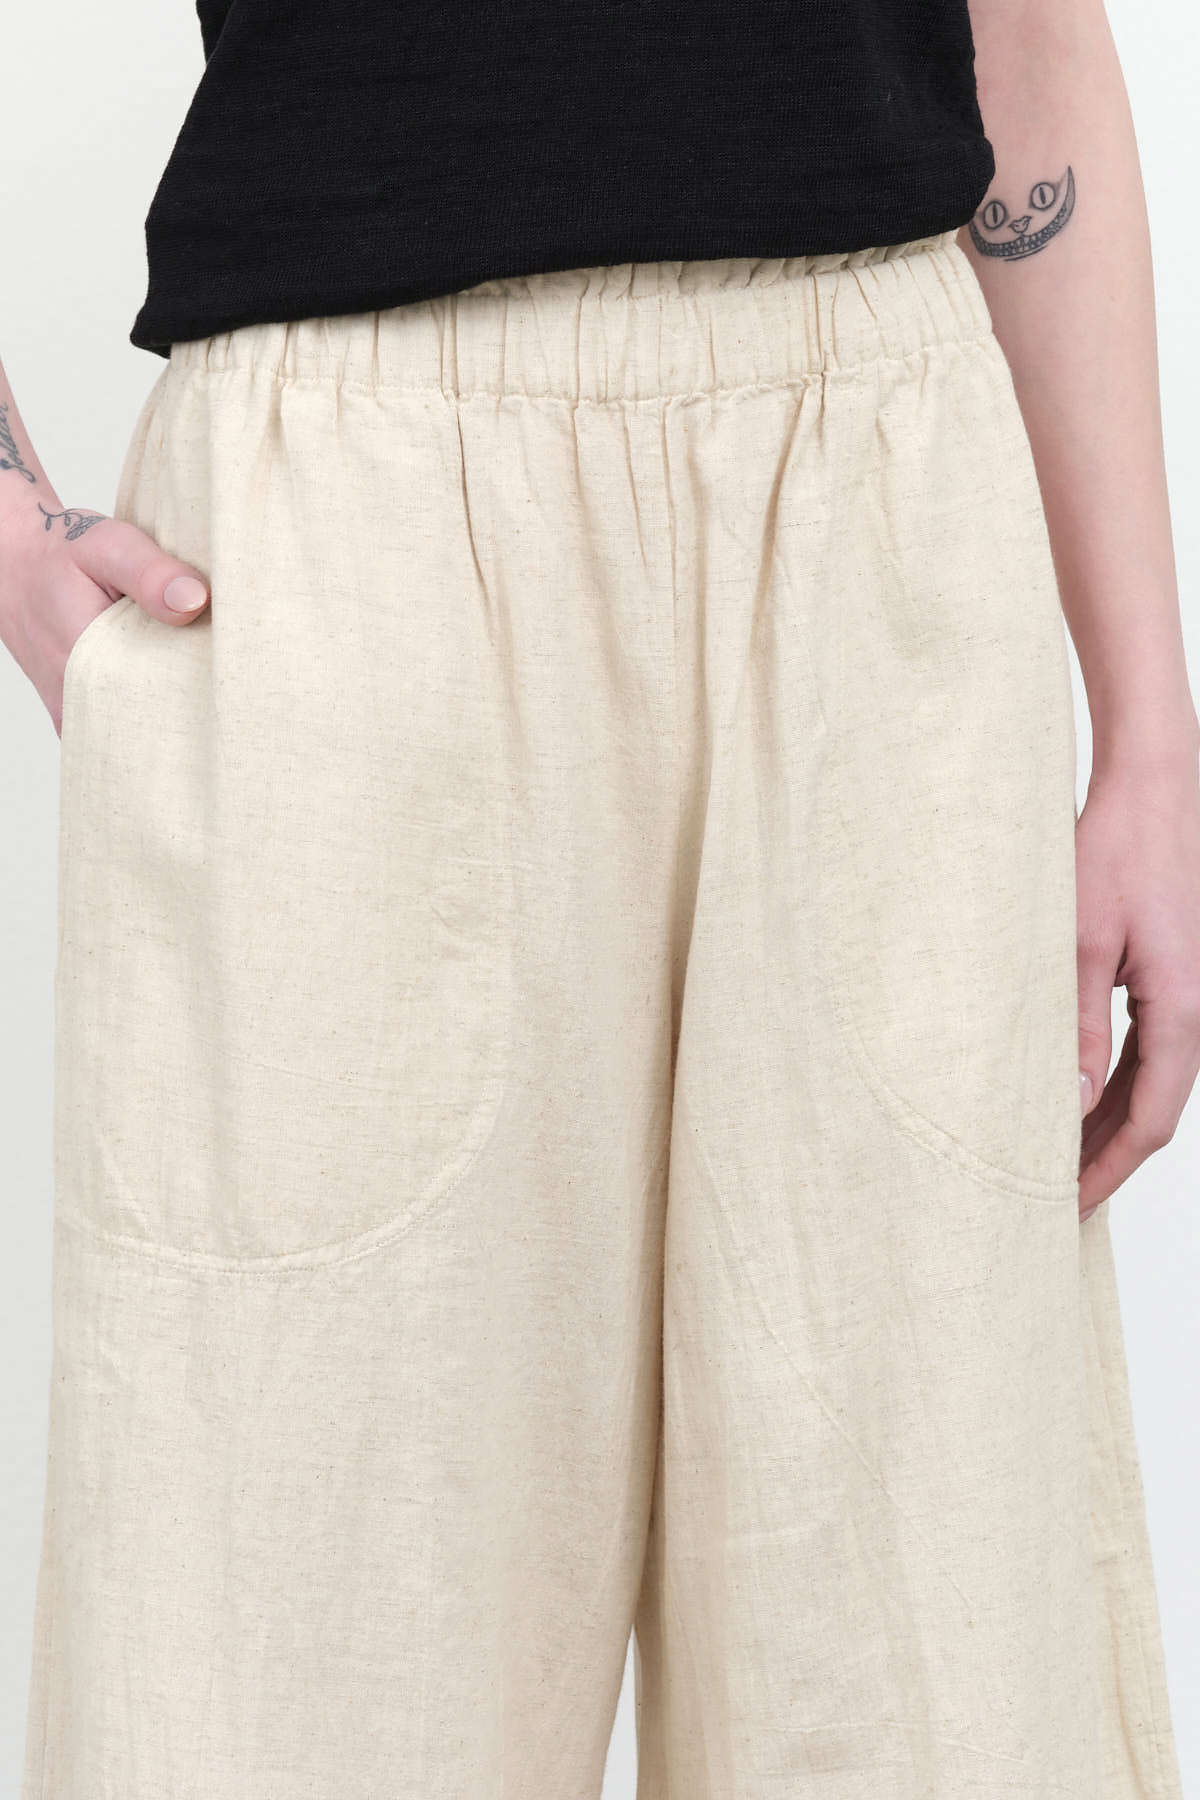 Waistband view of Mirth Pant in Oatmeal